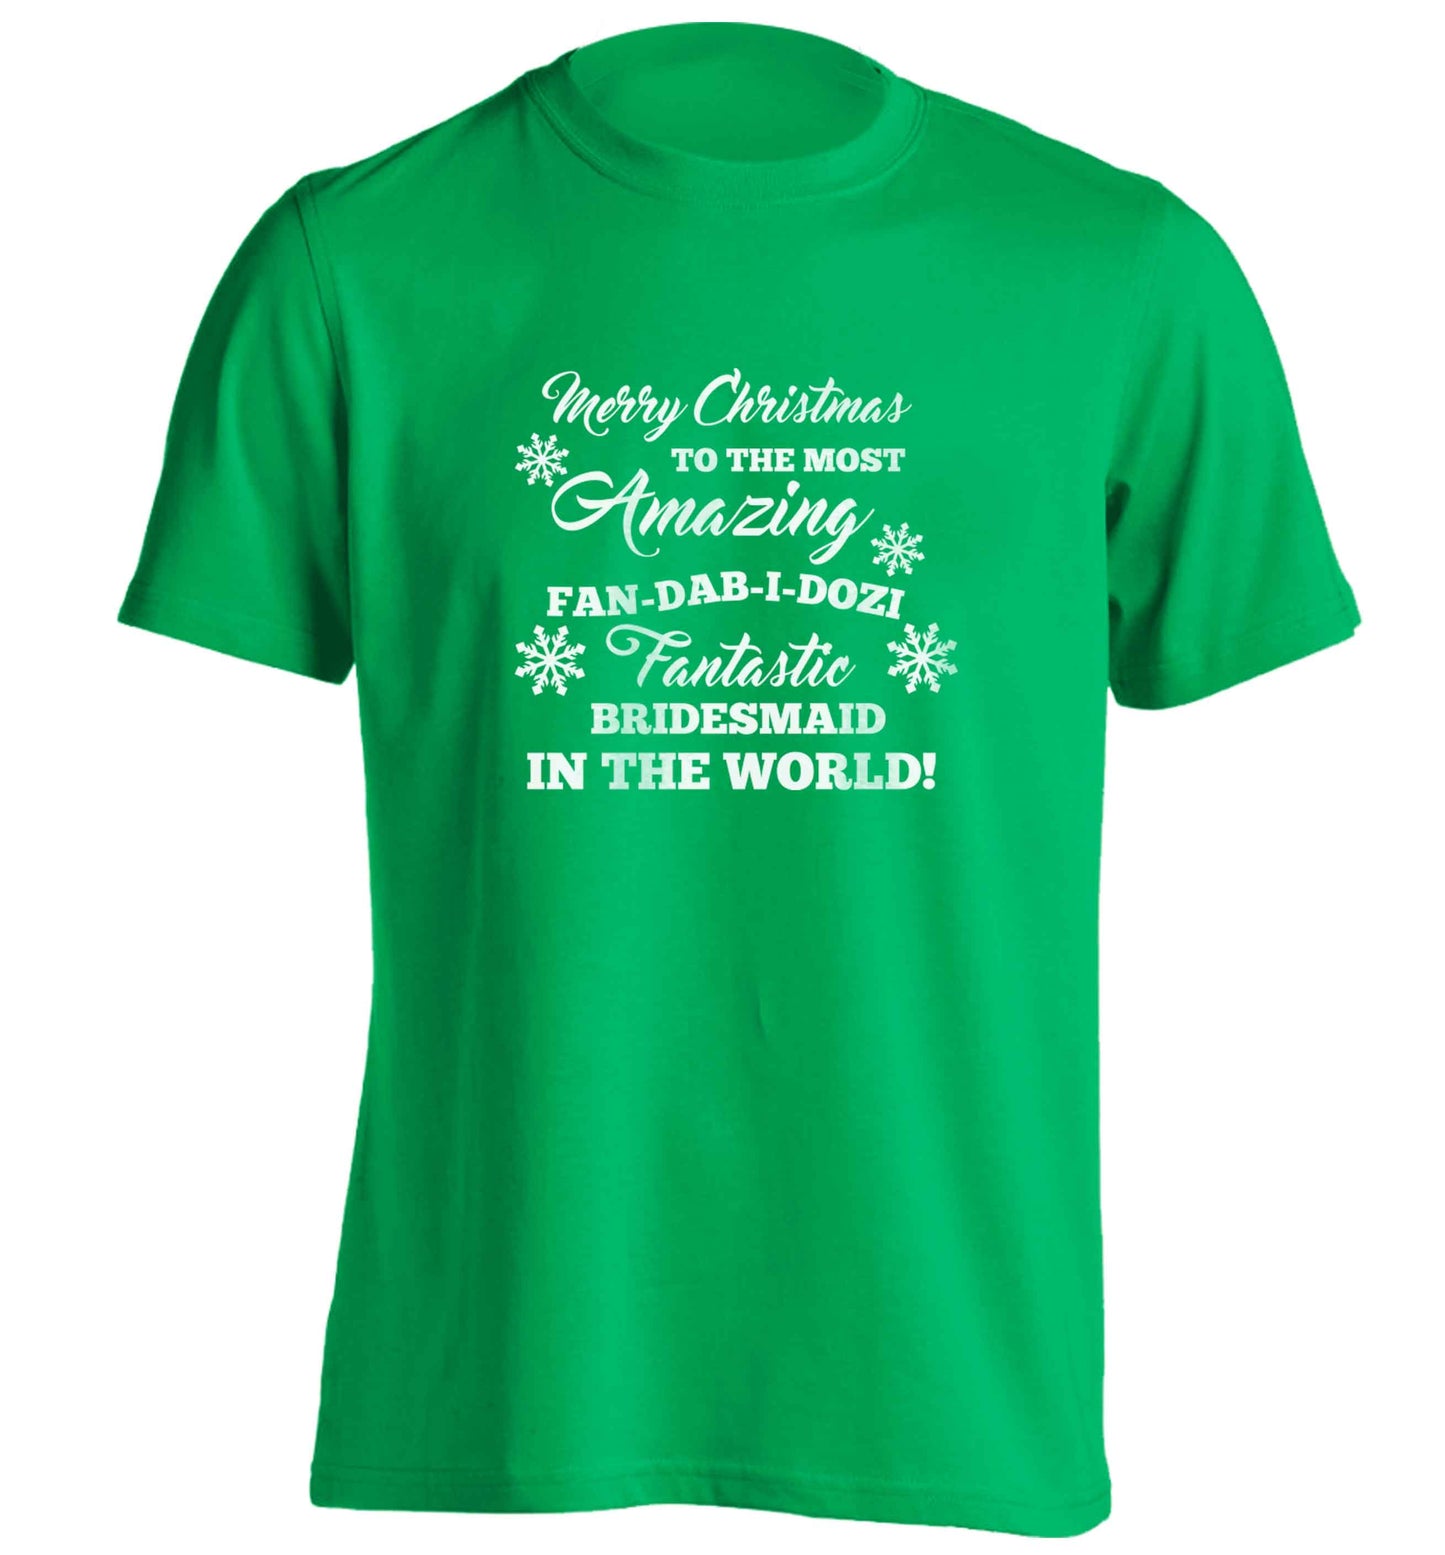 Merry Christmas to the most amazing fan-dab-i-dozi fantasic bridesmaid in the world adults unisex green Tshirt 2XL